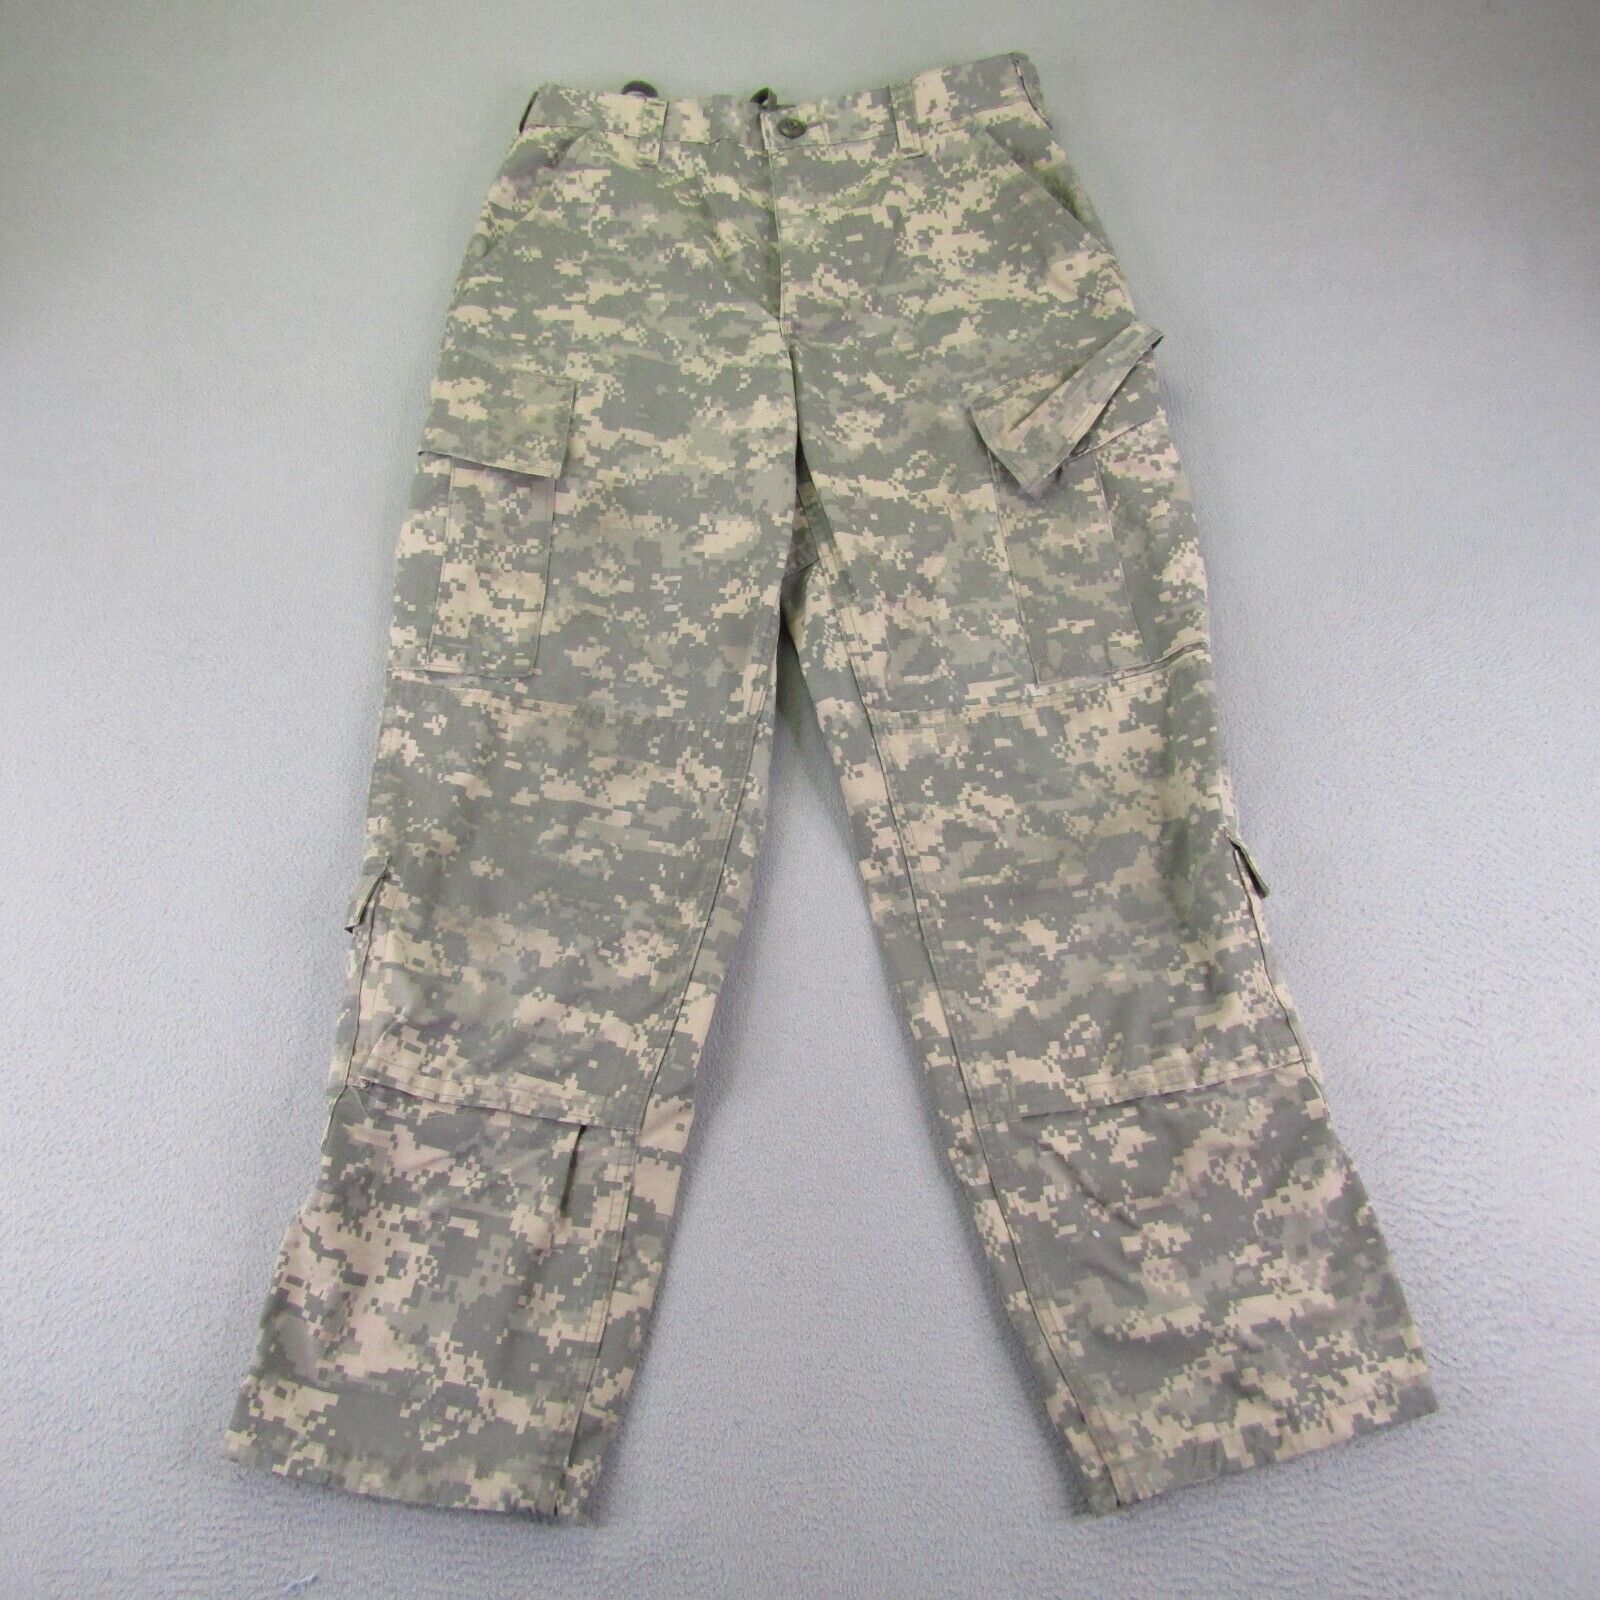 US Army Pants Small Short Camo Trousers Army Combat Uniform Tullahoma Ripstop